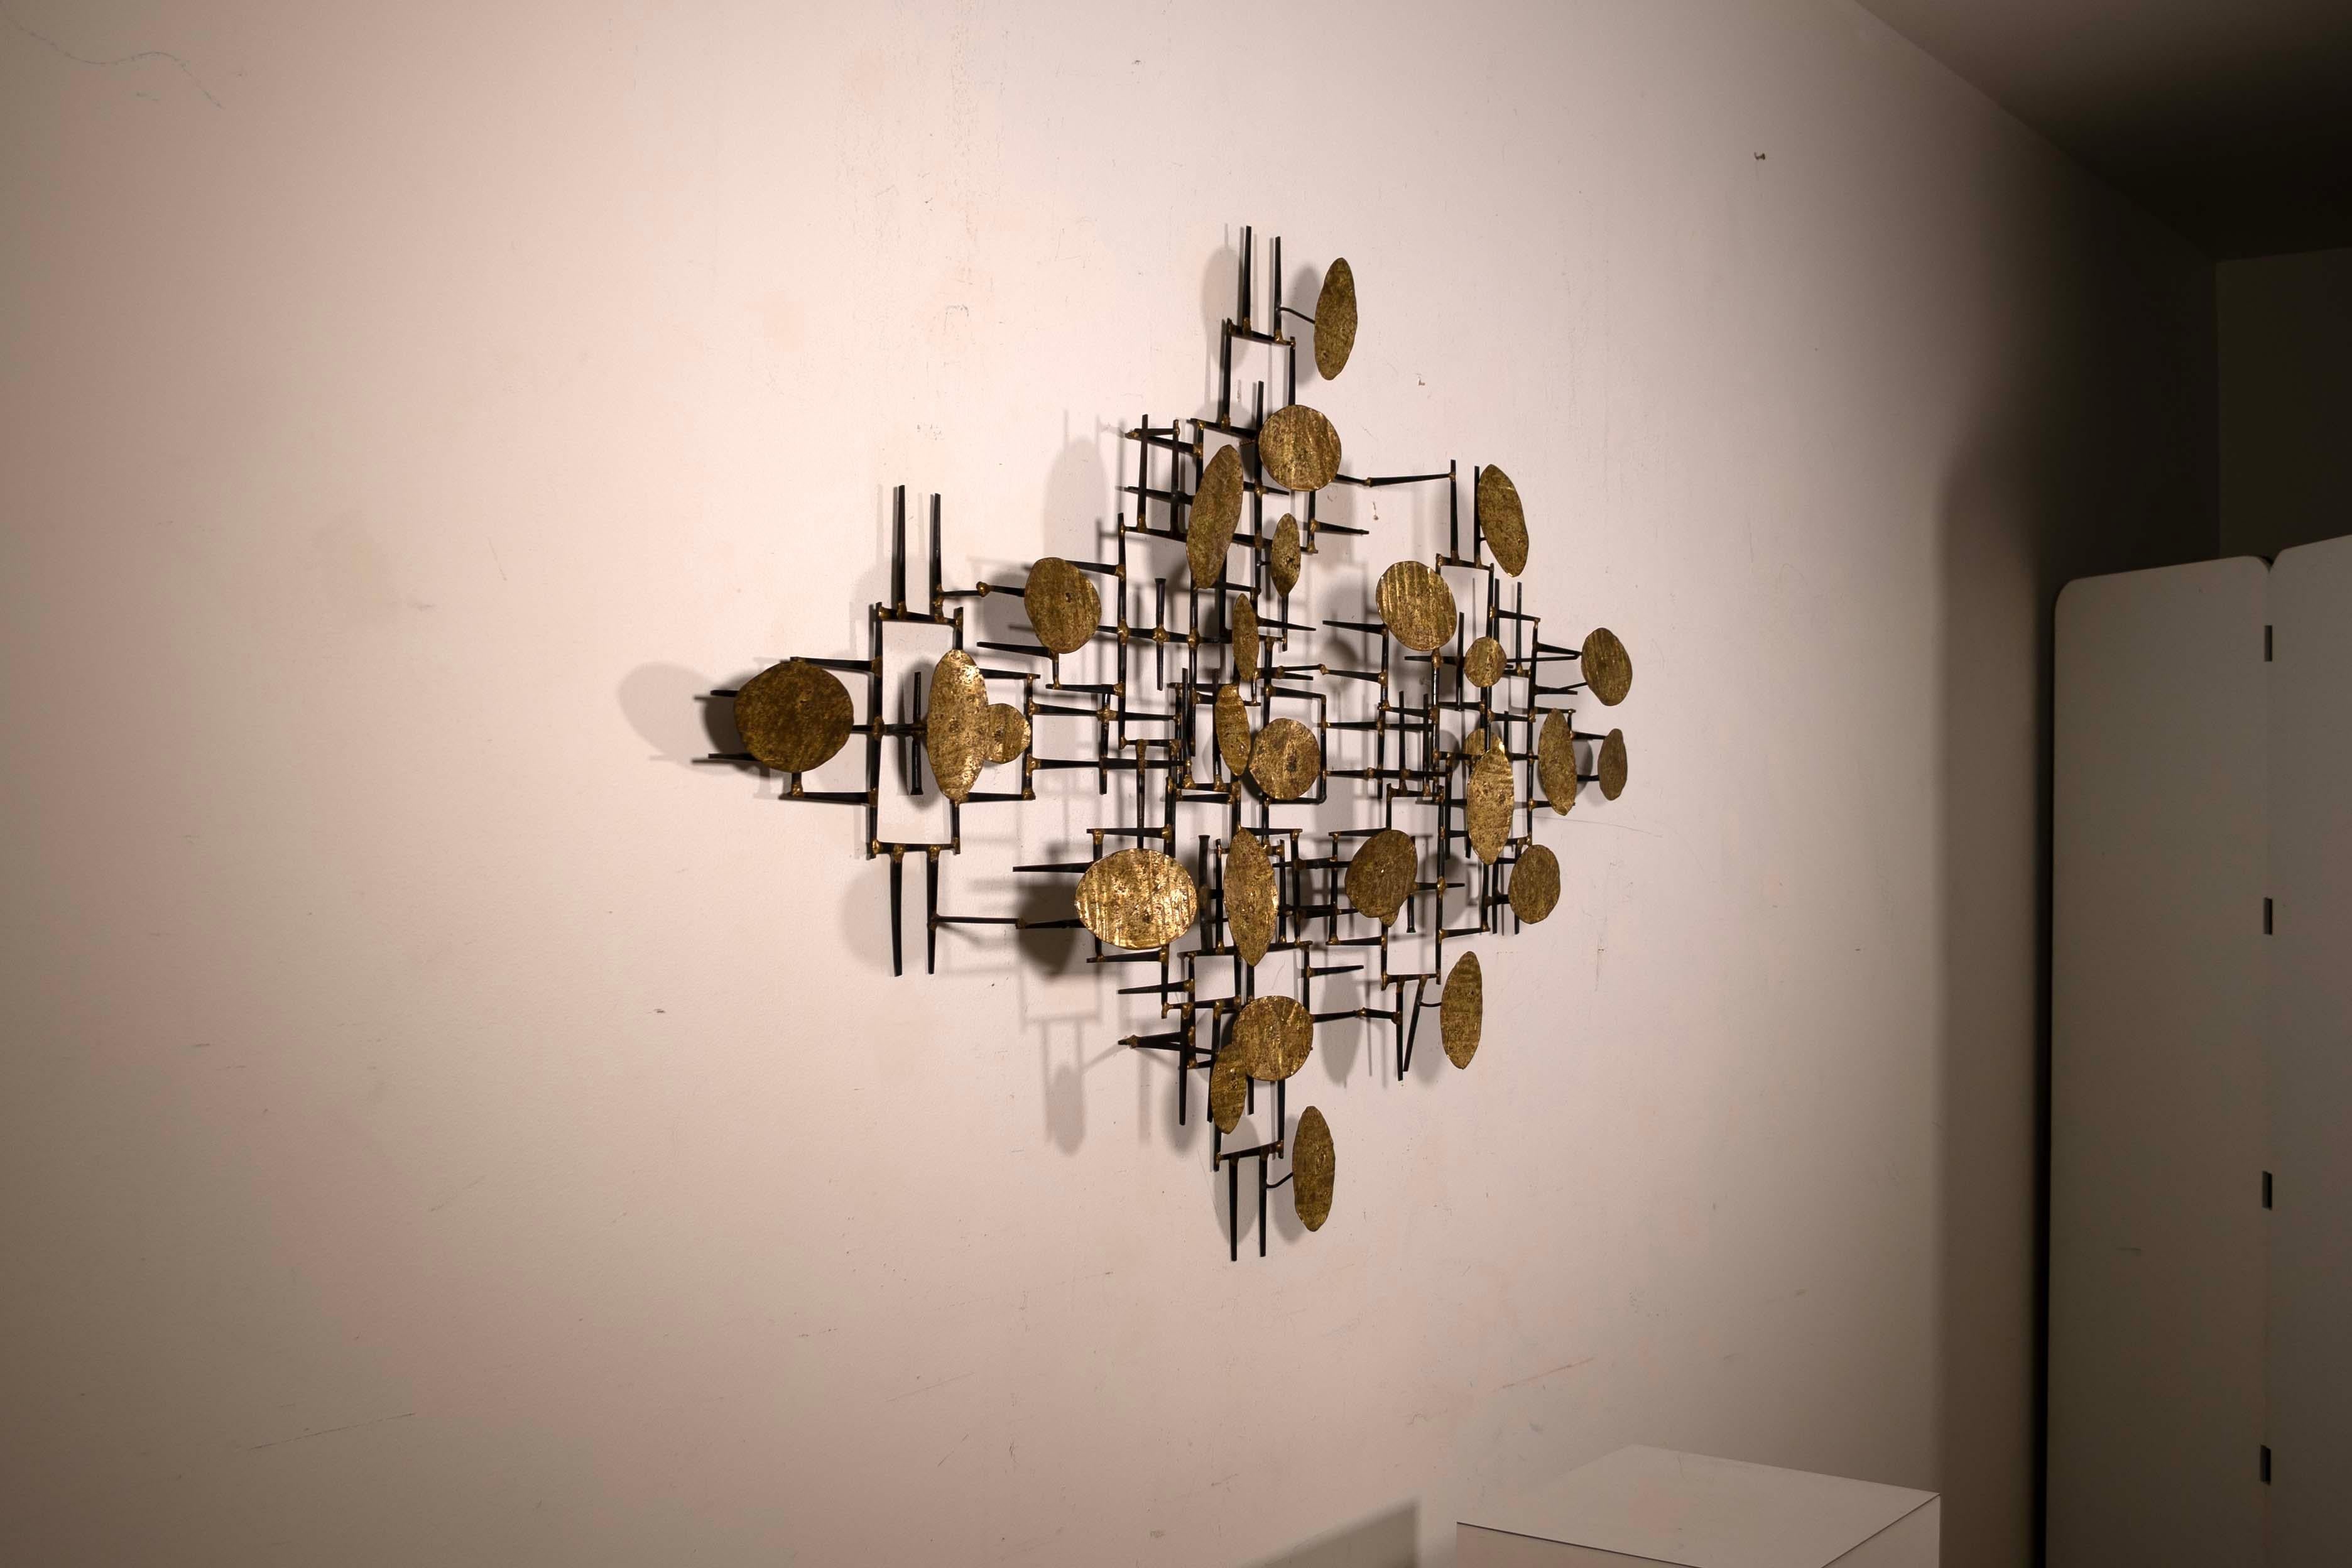 Stunning and sculptural, this Marc Weinstein Creates Style Brutalist Wall Sculpture is an embodiment of the bold and textured aesthetics of the Mid-Century Modern movement. The complex interplay of abstract metal shapes and the warm, earthy tones of